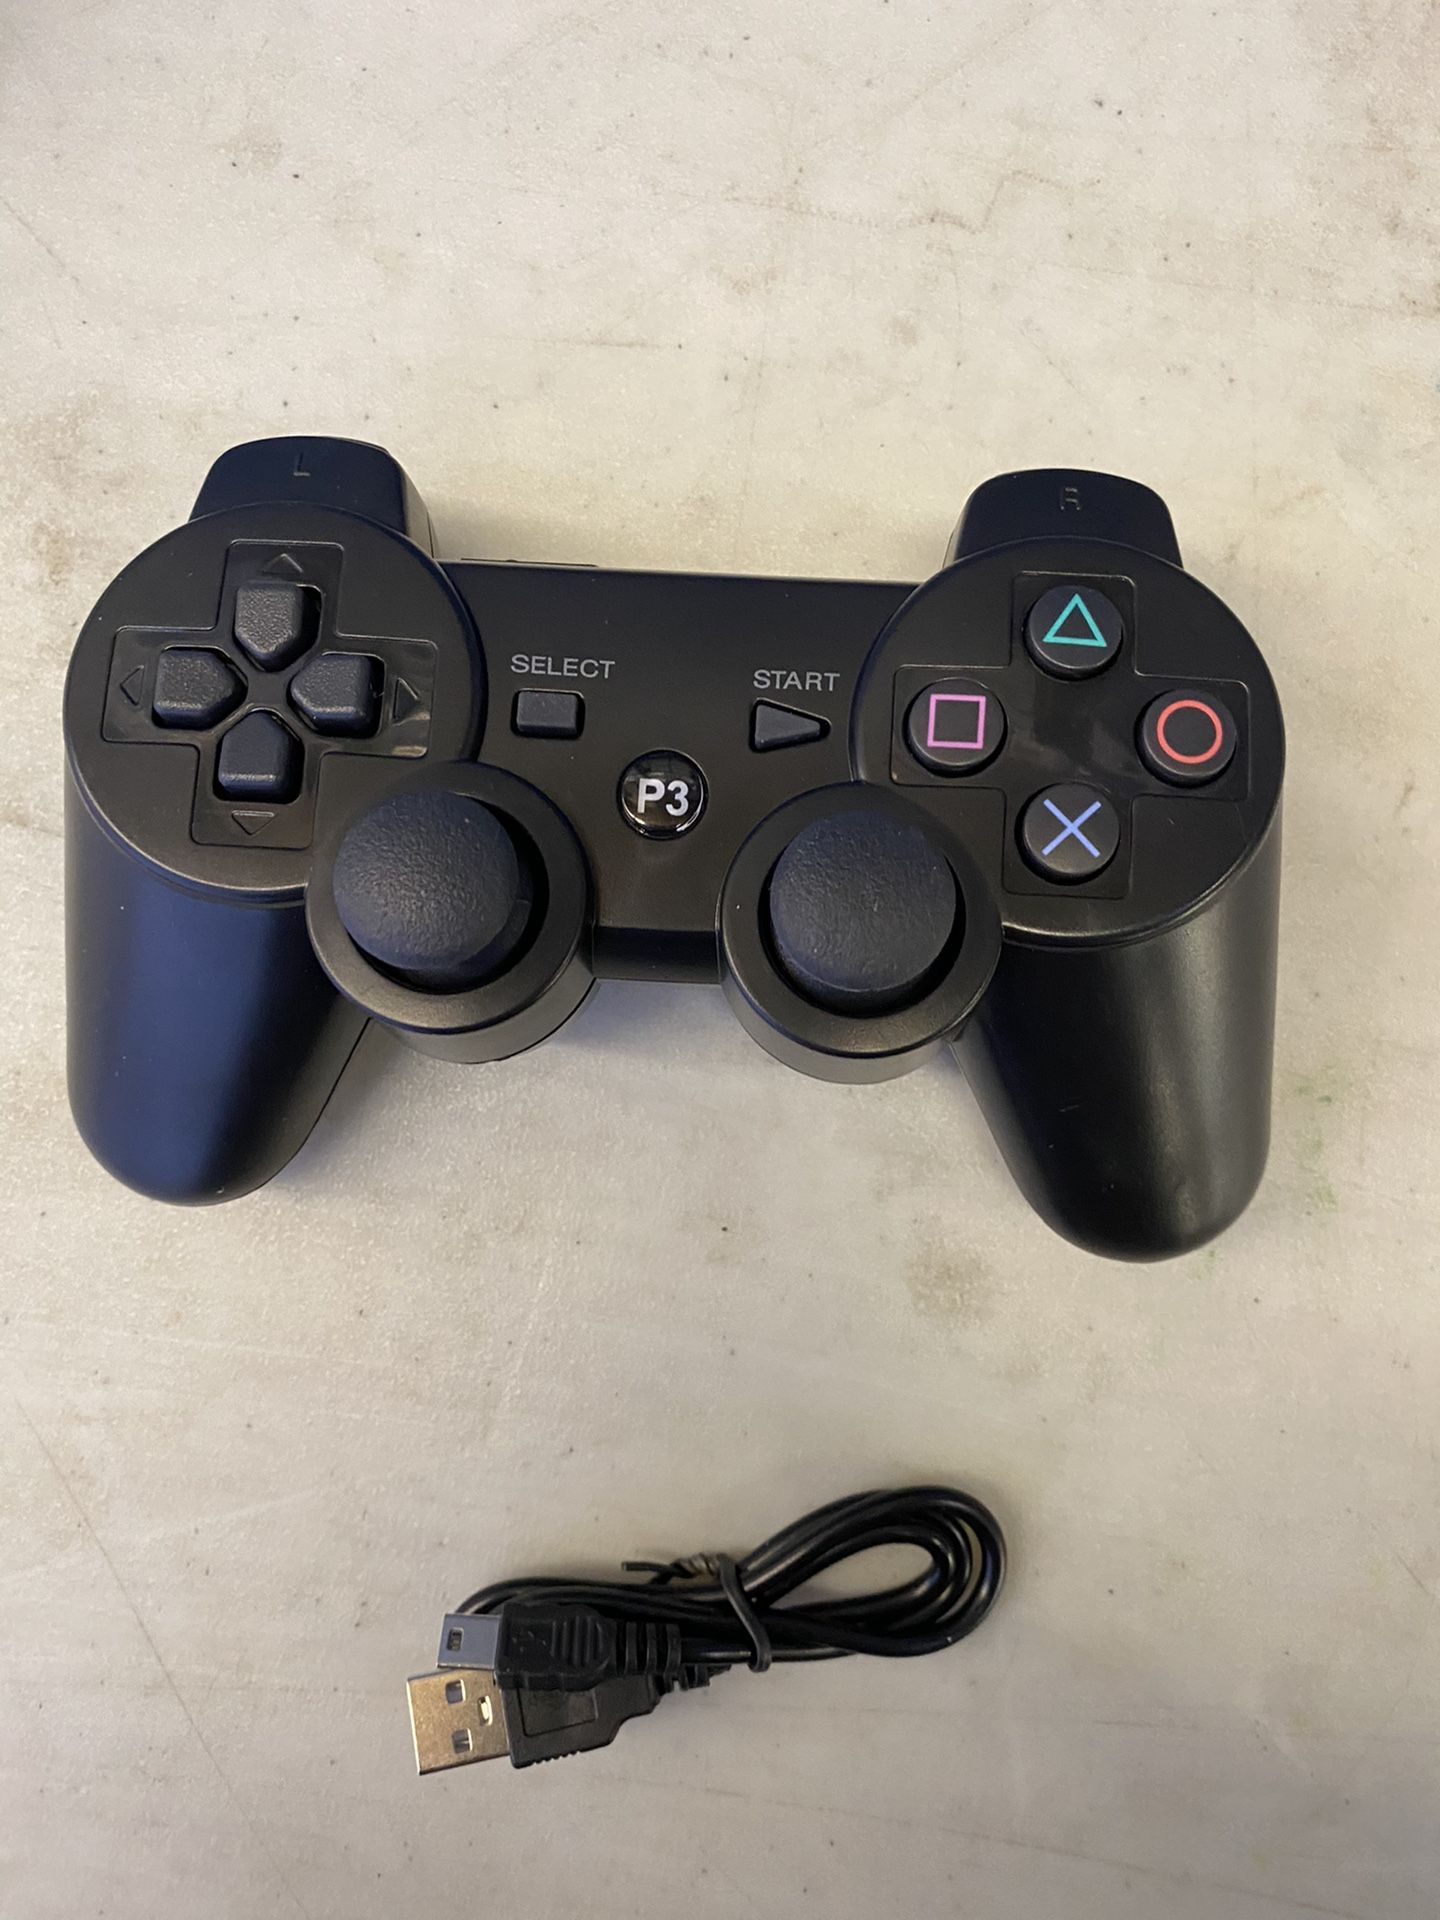 New Non-Brand DualShock3 Wireless Controller For PS3